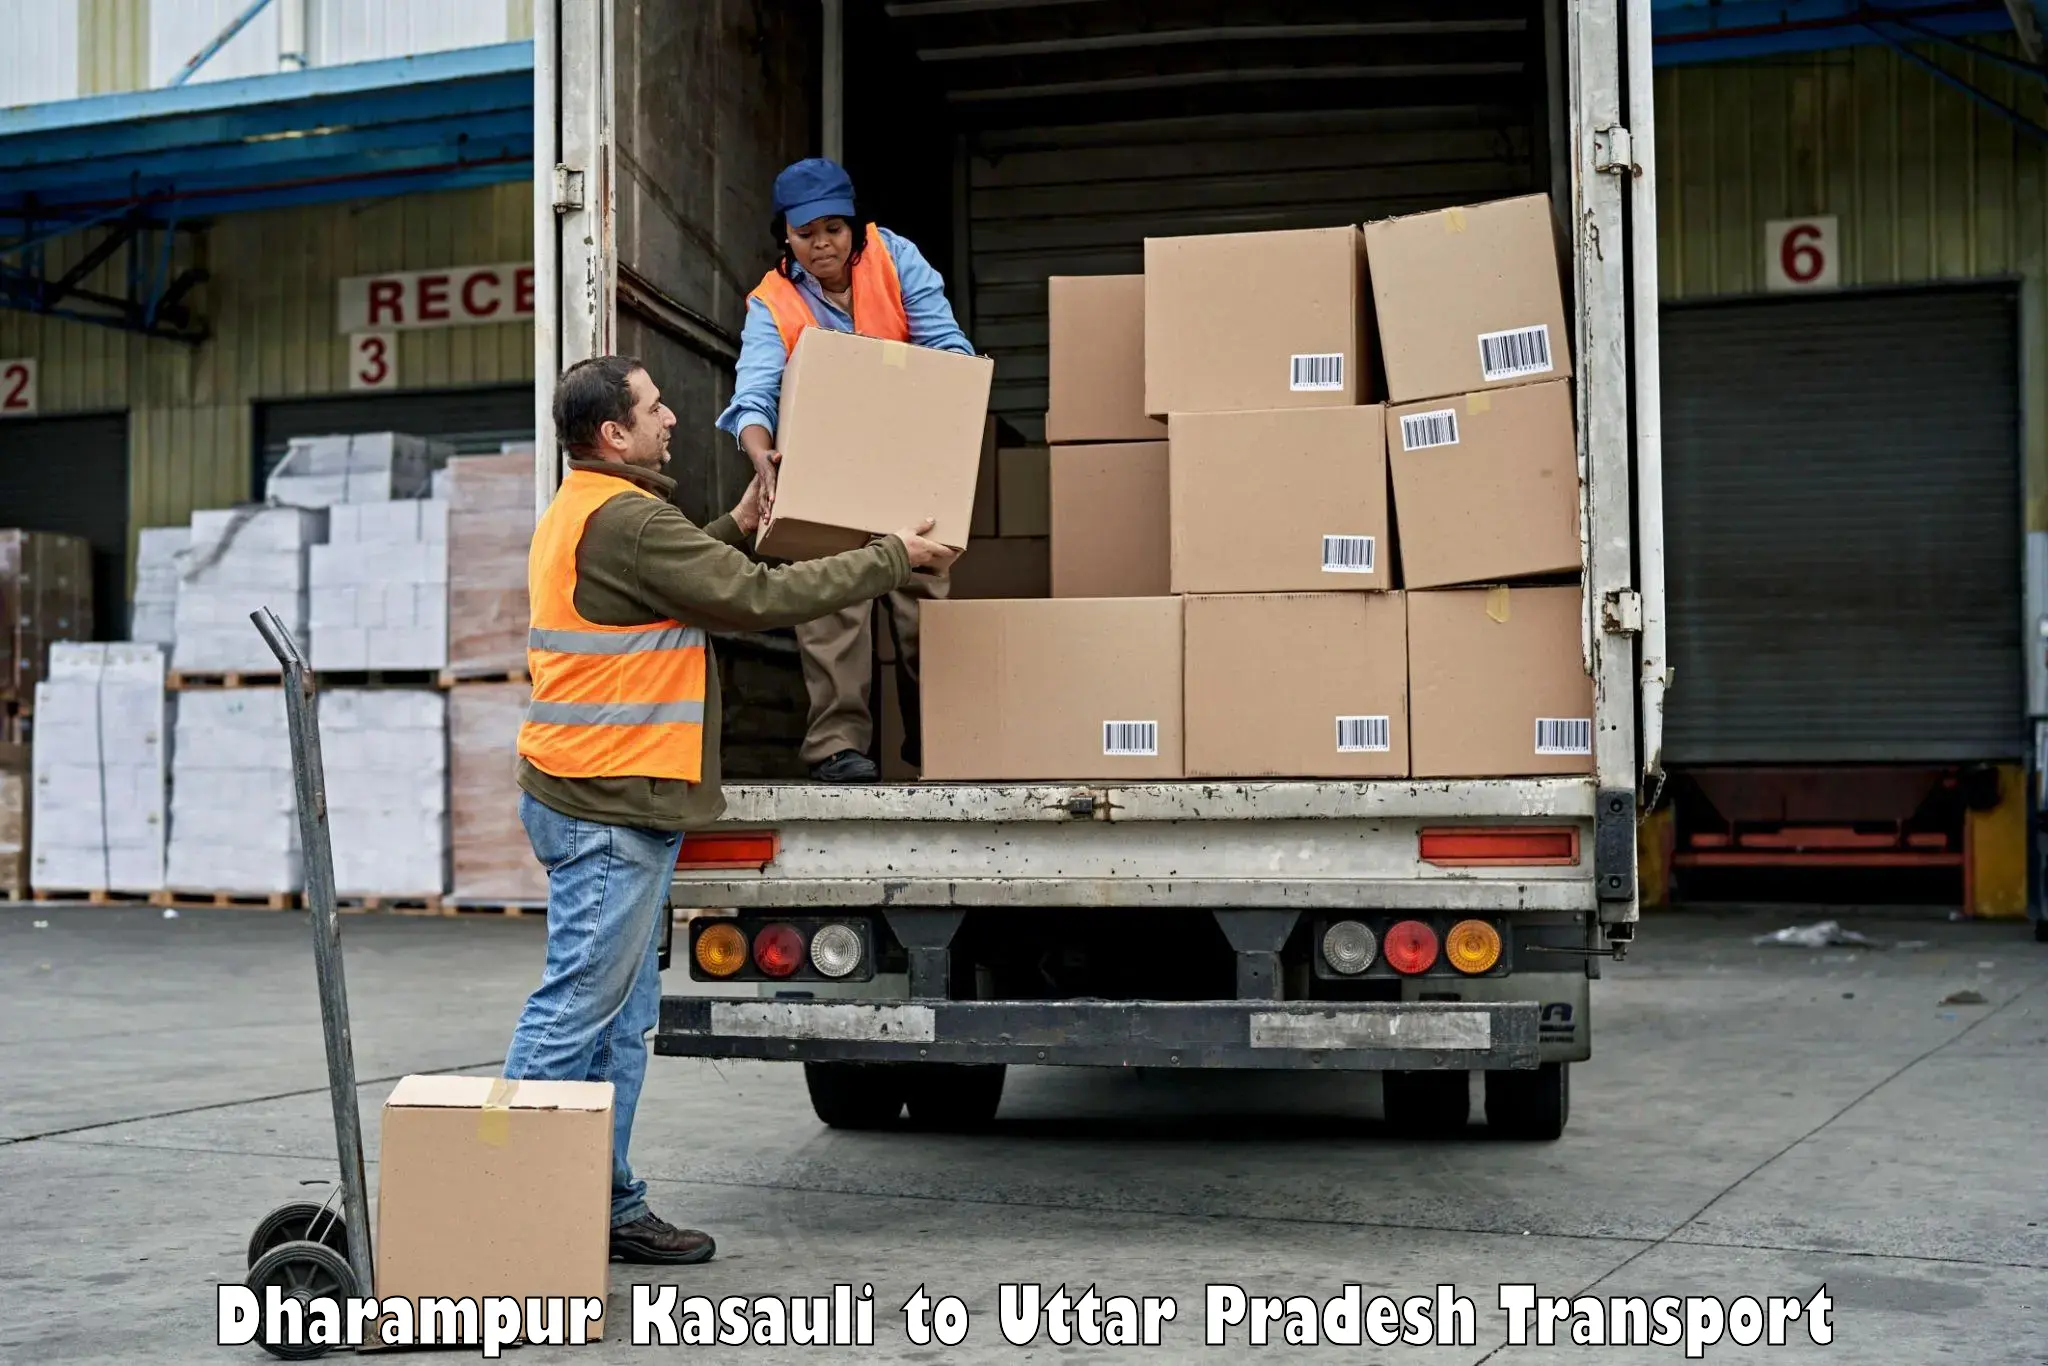 Parcel transport services Dharampur Kasauli to Hathras